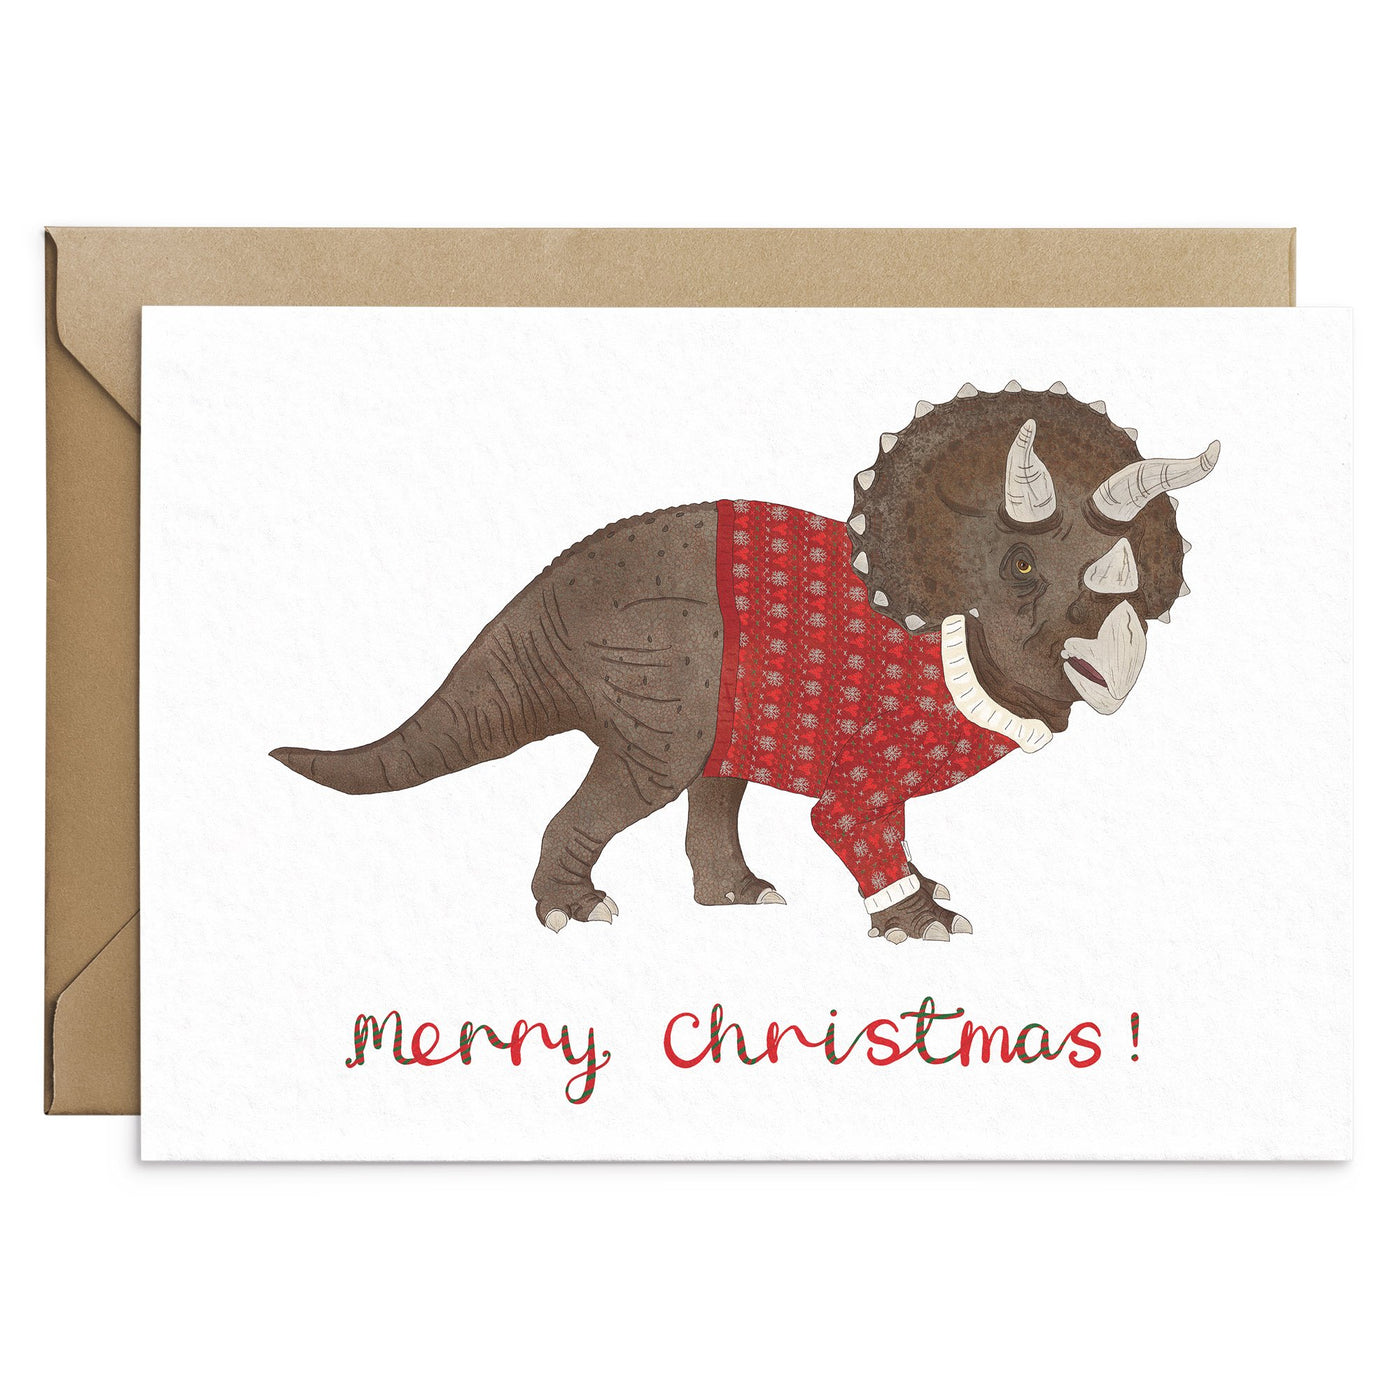 The Triceratops Dinosaur Christmas Card - Poppins & Co.